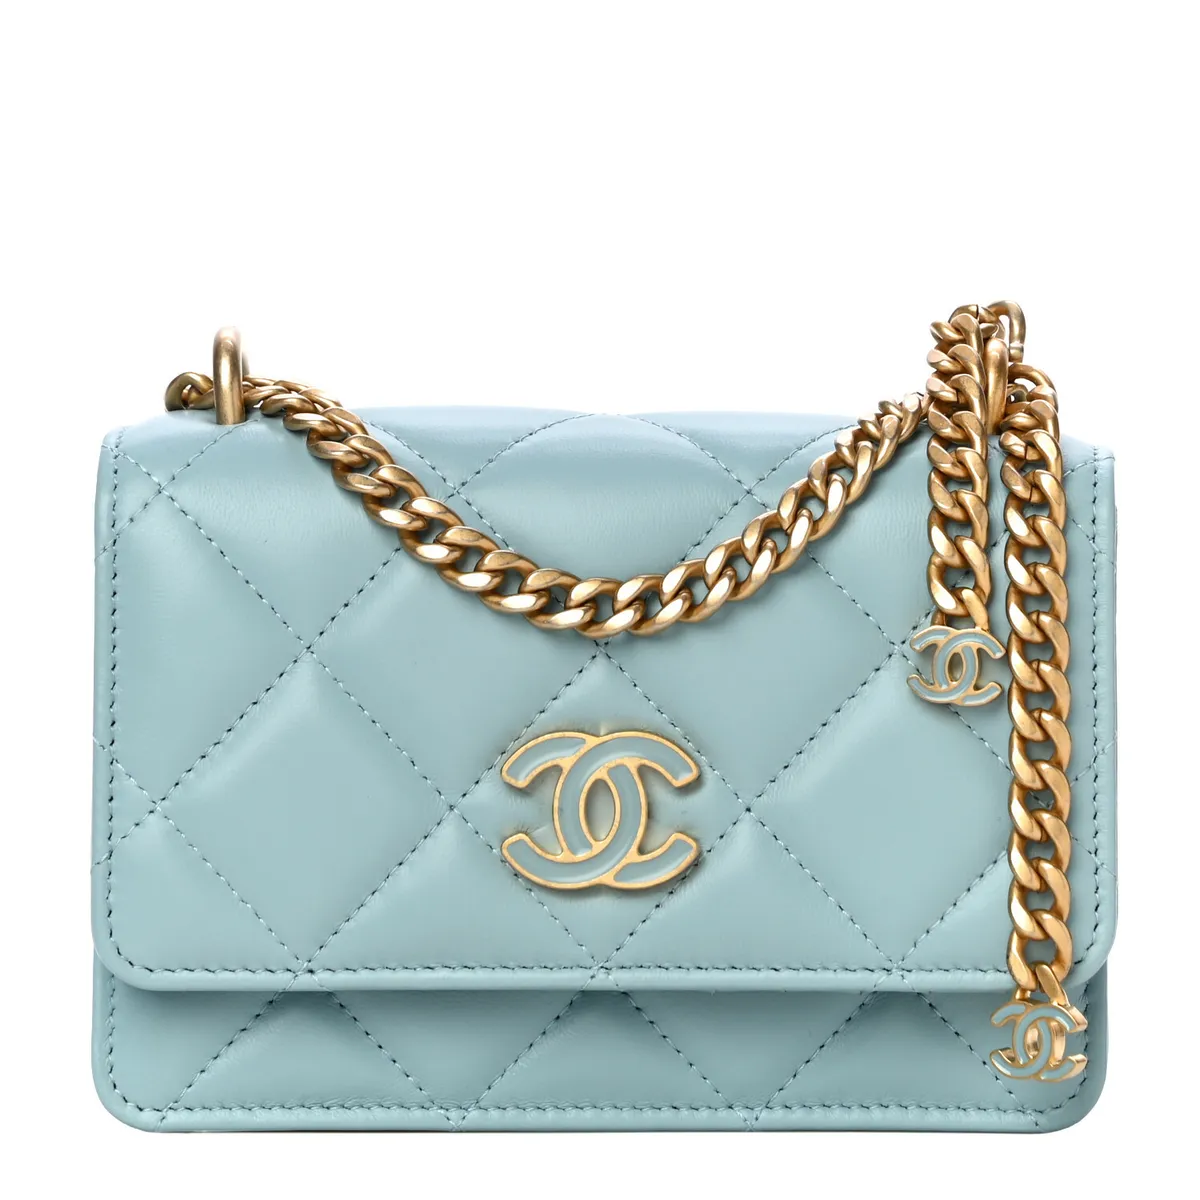 CHANEL Lambskin Enamel Quilted Clutch With Chain, Light Blue, NEW IN BOX